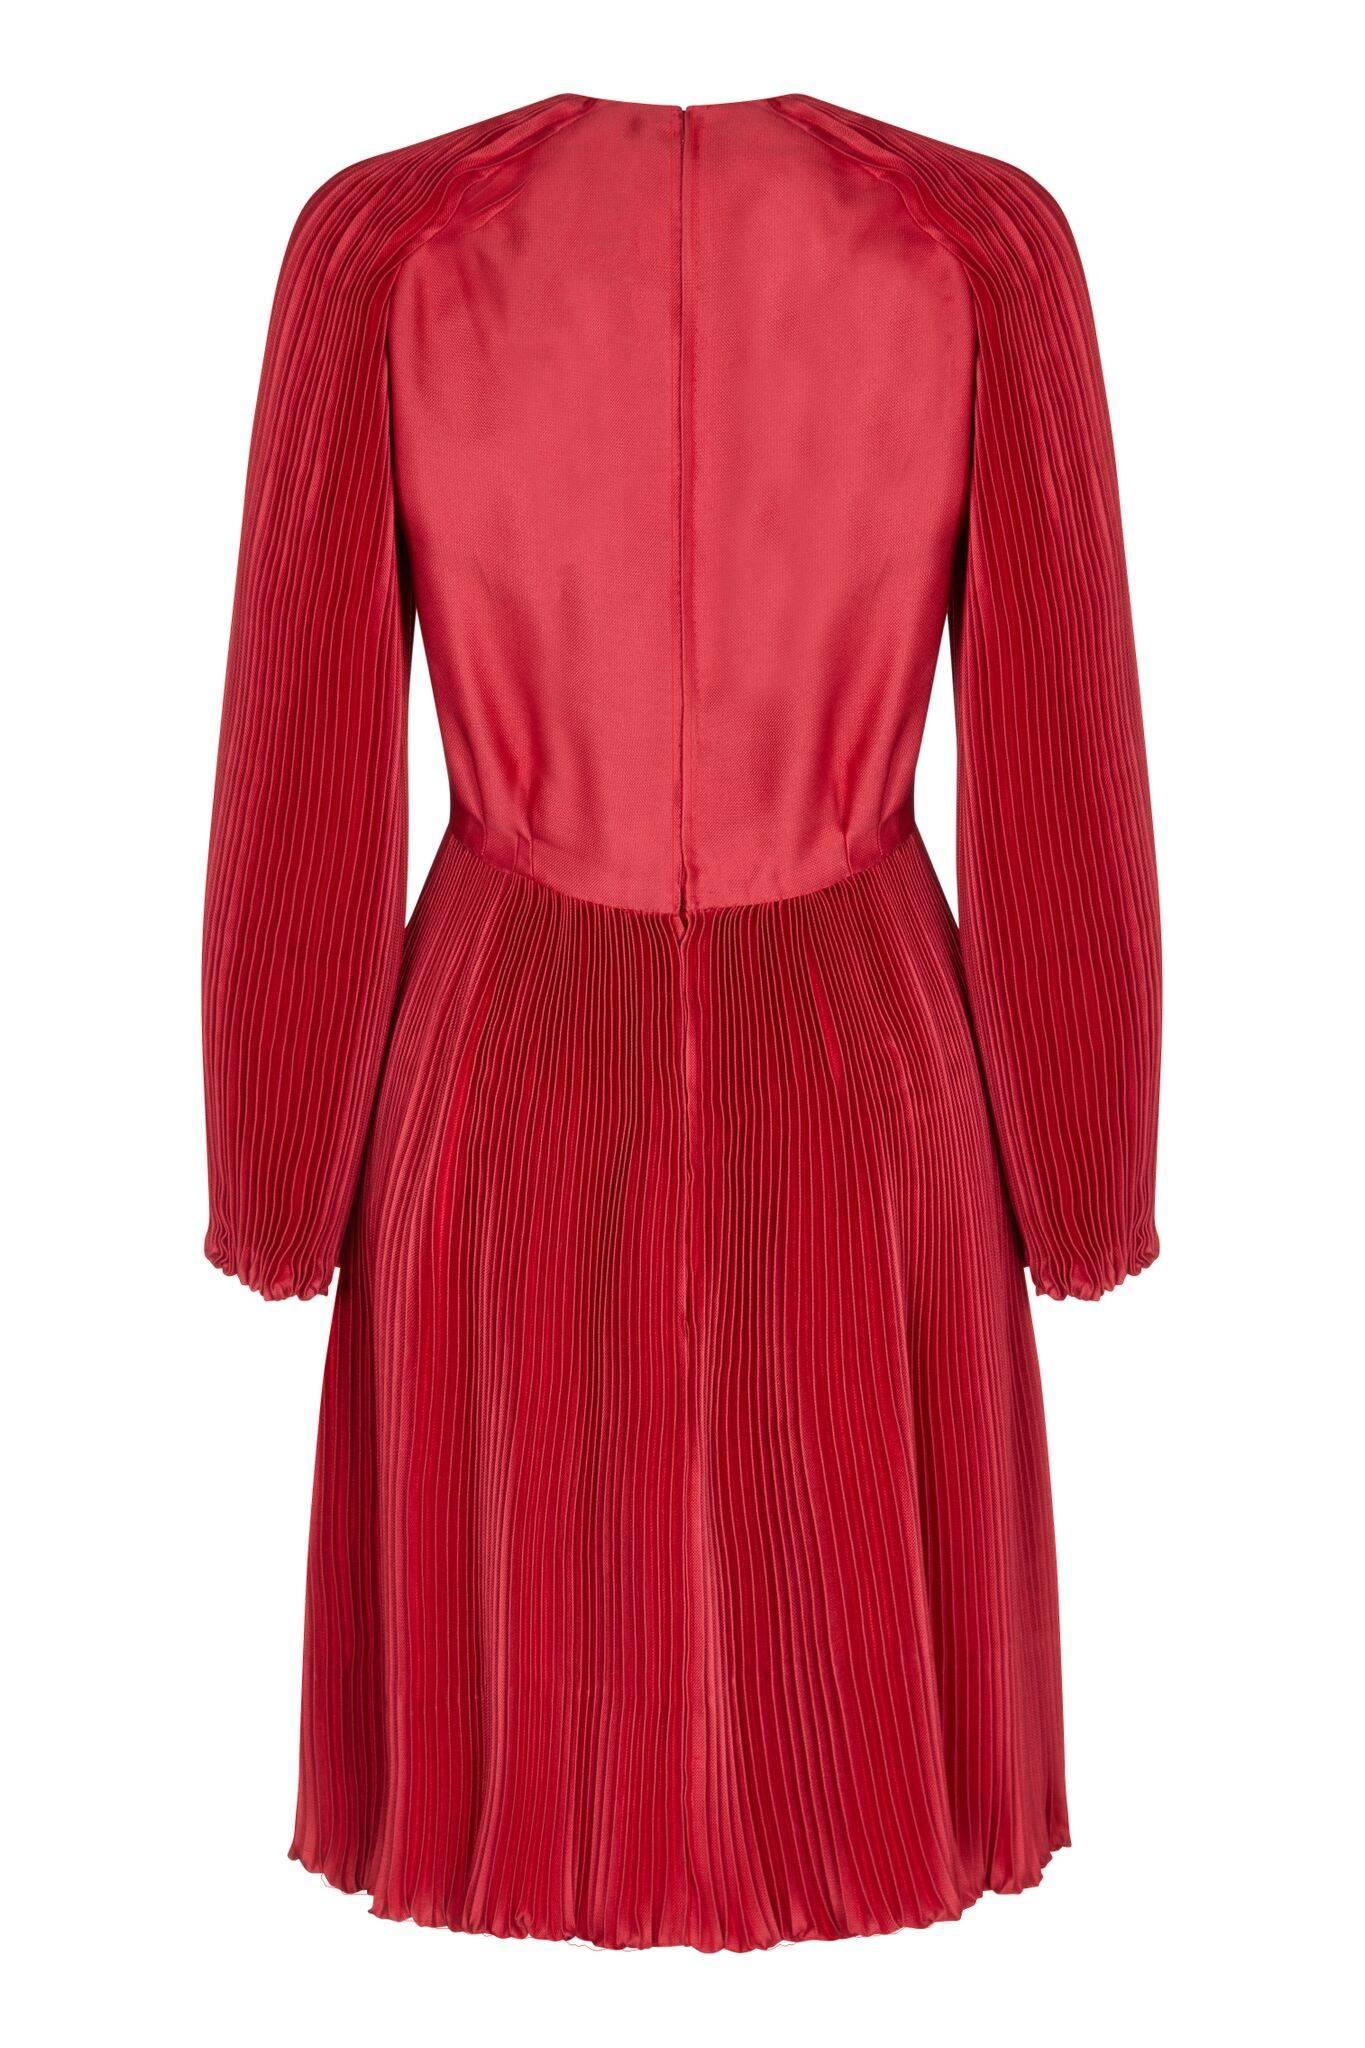 This luxurious 1960s couture red silk cotton occasion dress boasts magnificent construction, and has been custom made and hand finished. The dress is made of a heavy silk cotton fabric in a deep shade of crimson, and fully lined in silk. Exquisite